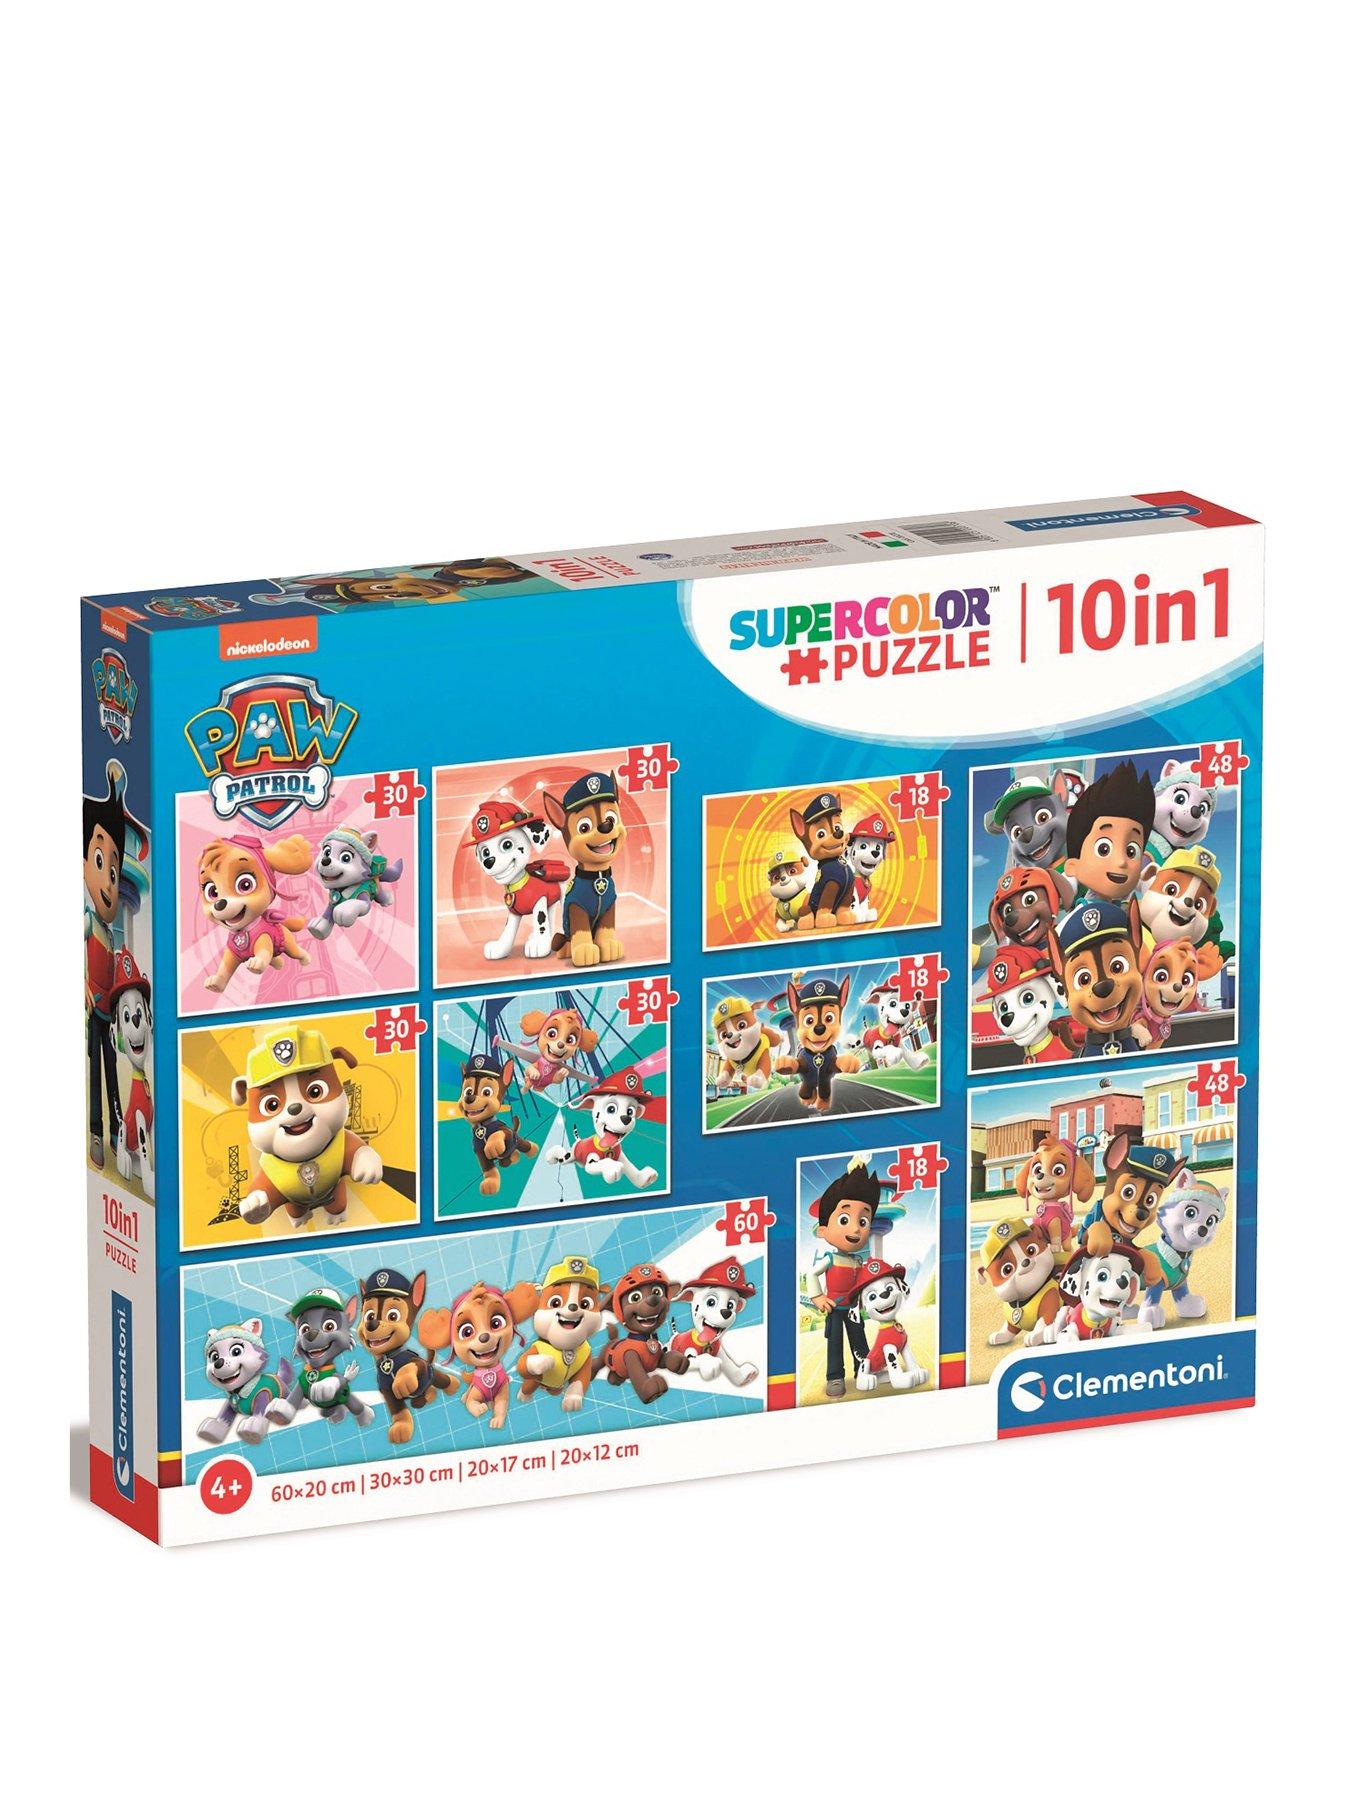 Buy Super Mario 4 X 100 Piece Bumper Jigsaw Puzzle Pack, Jigsaws and  puzzles